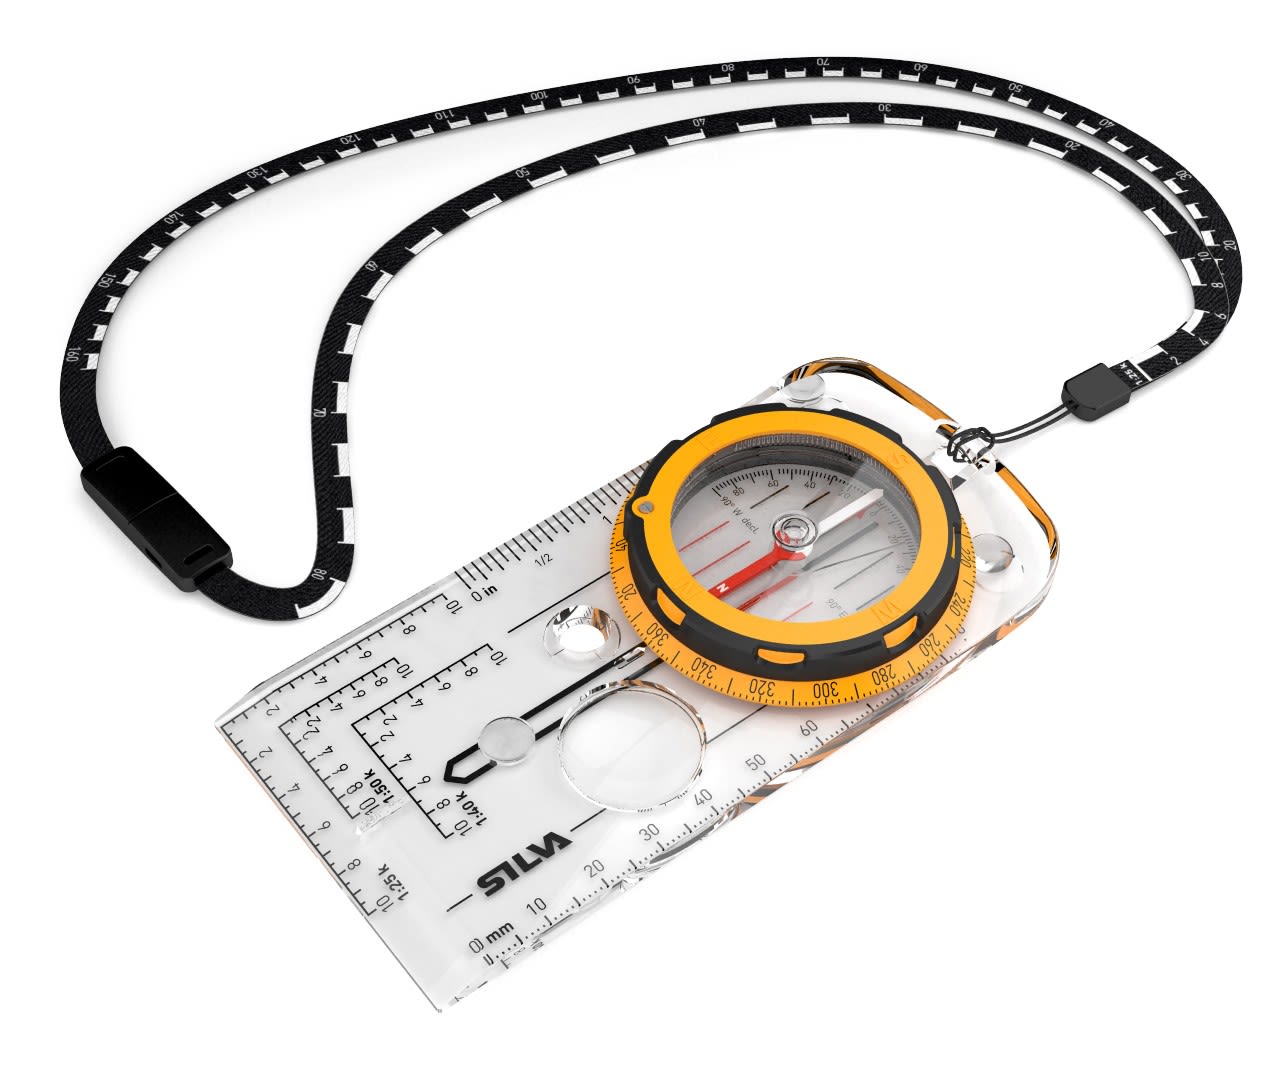 Silva Expedition Compass Kompanden- Grsse One Size - Farbe Transparent